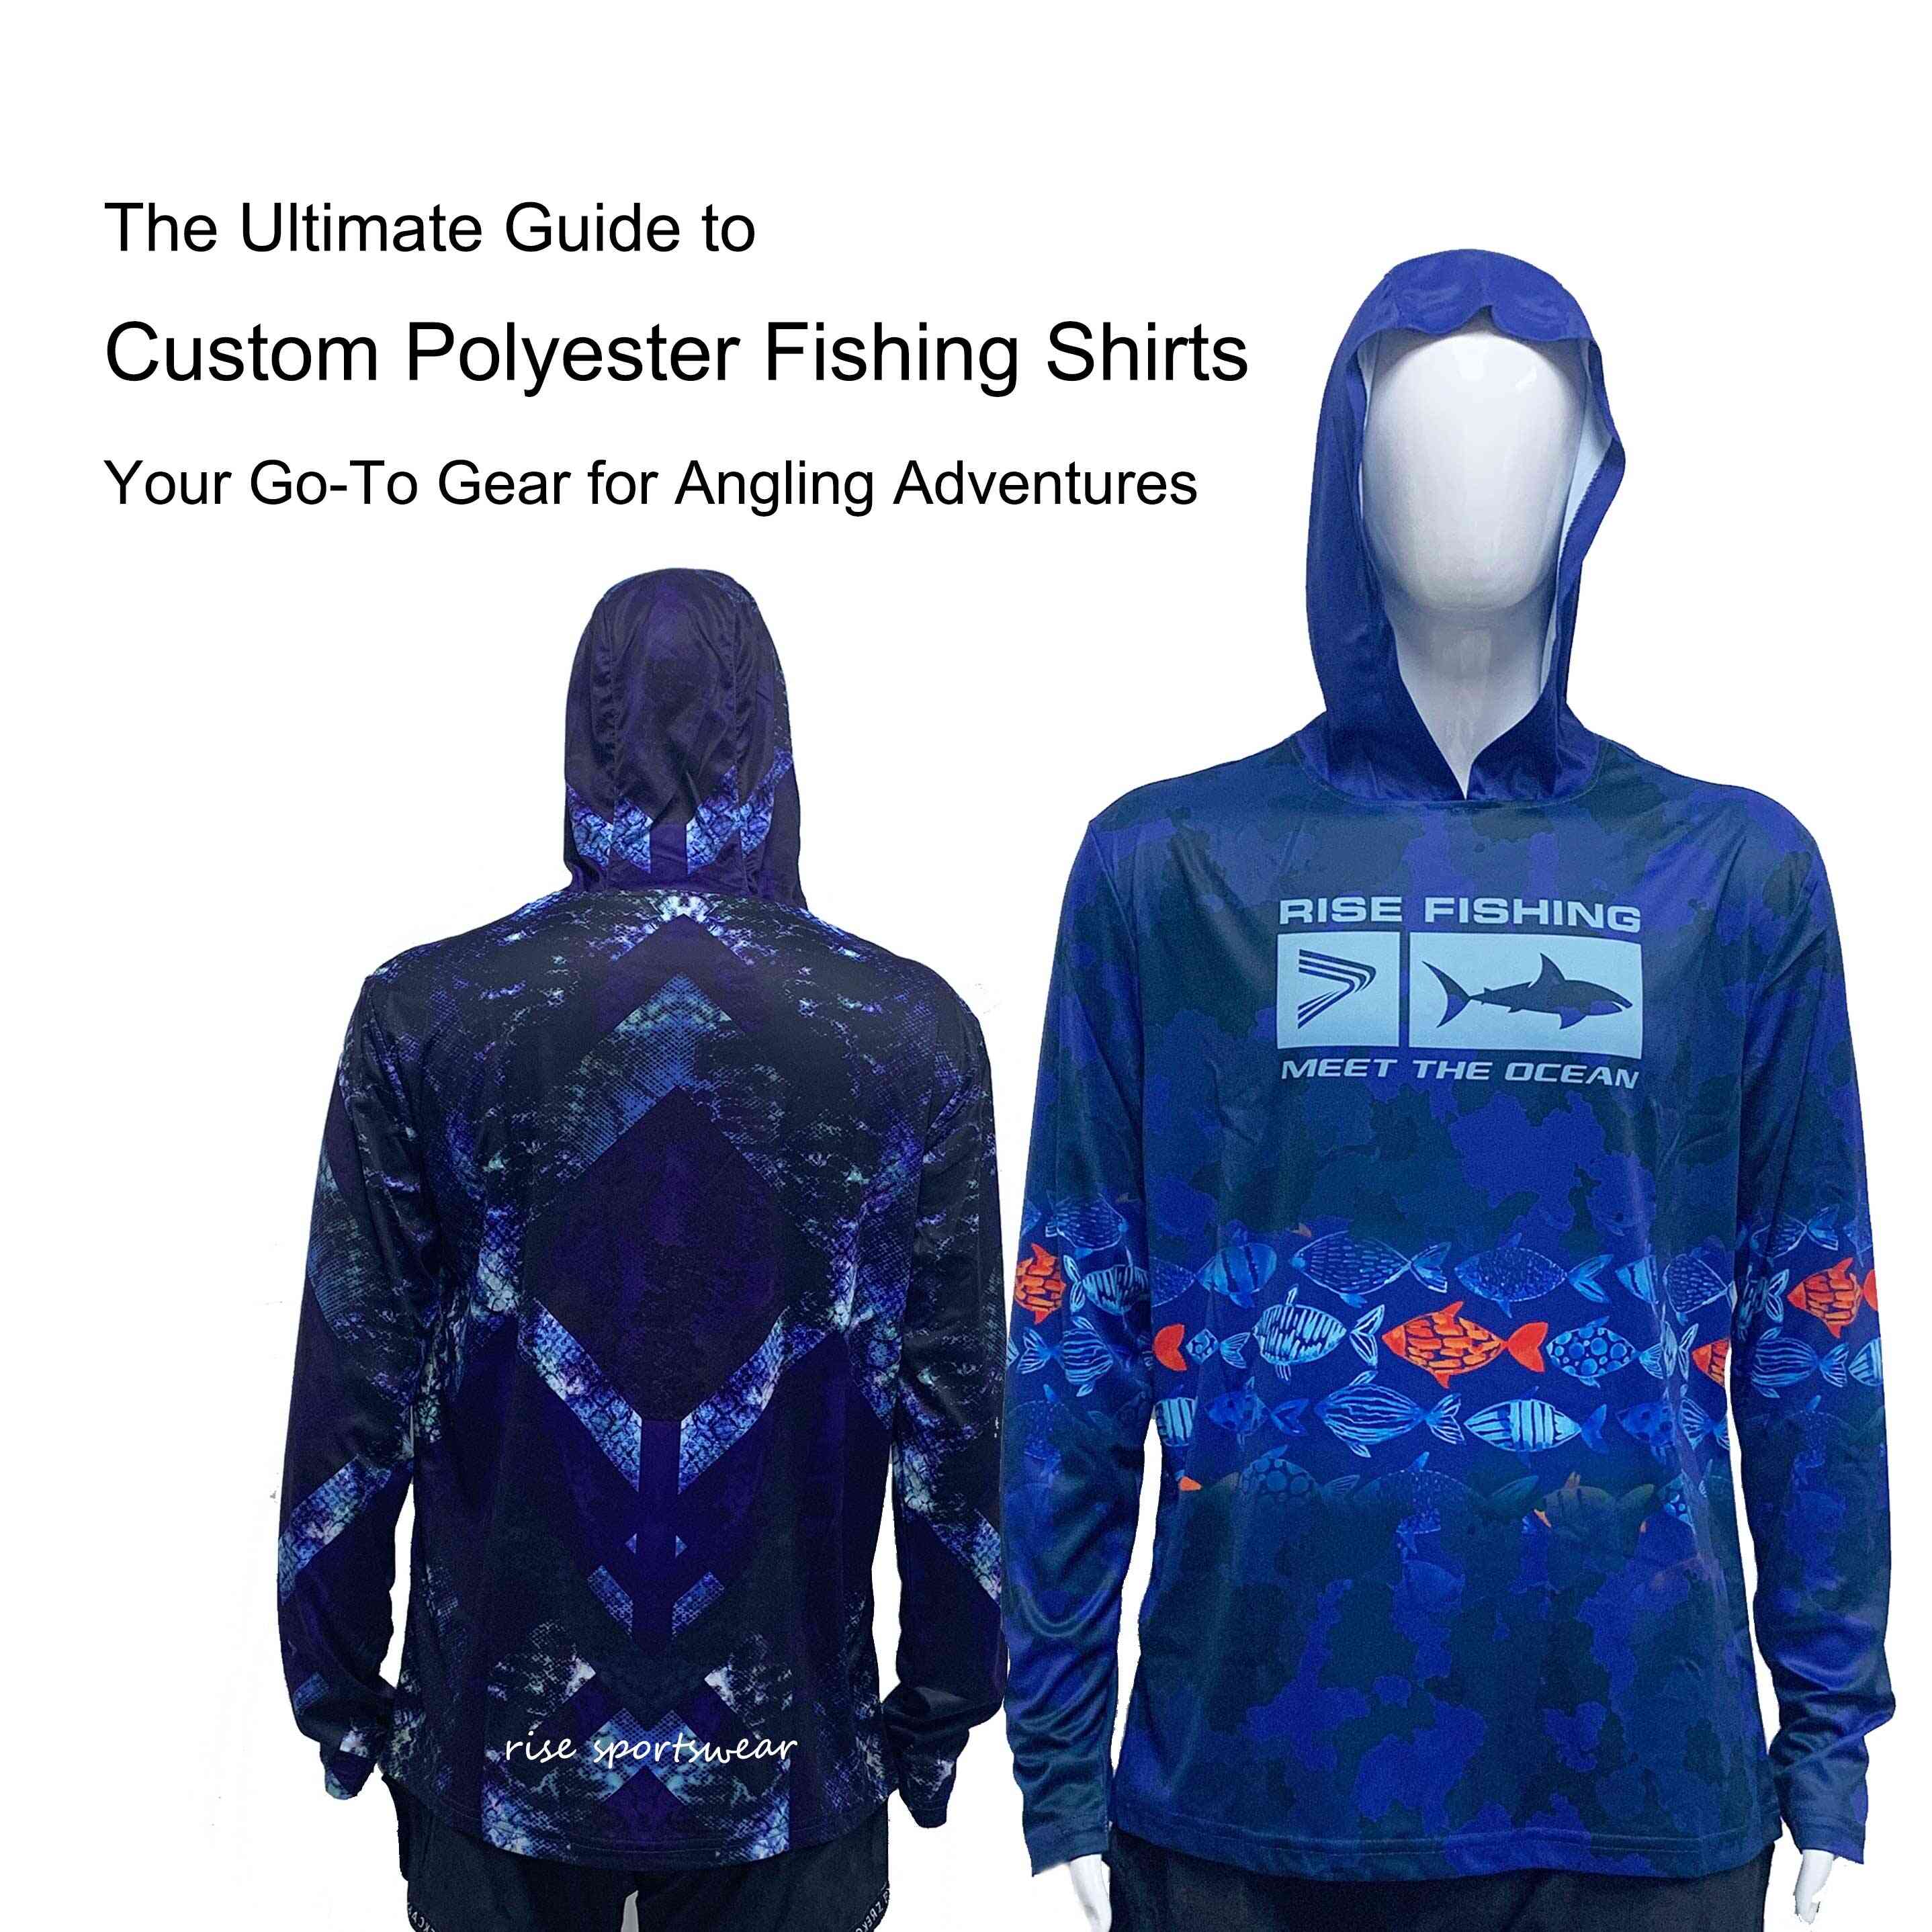 
                The Ultimate Guide to Custom Polyester Fishing Shirts-Your Go-To Gear for Angling Adventures